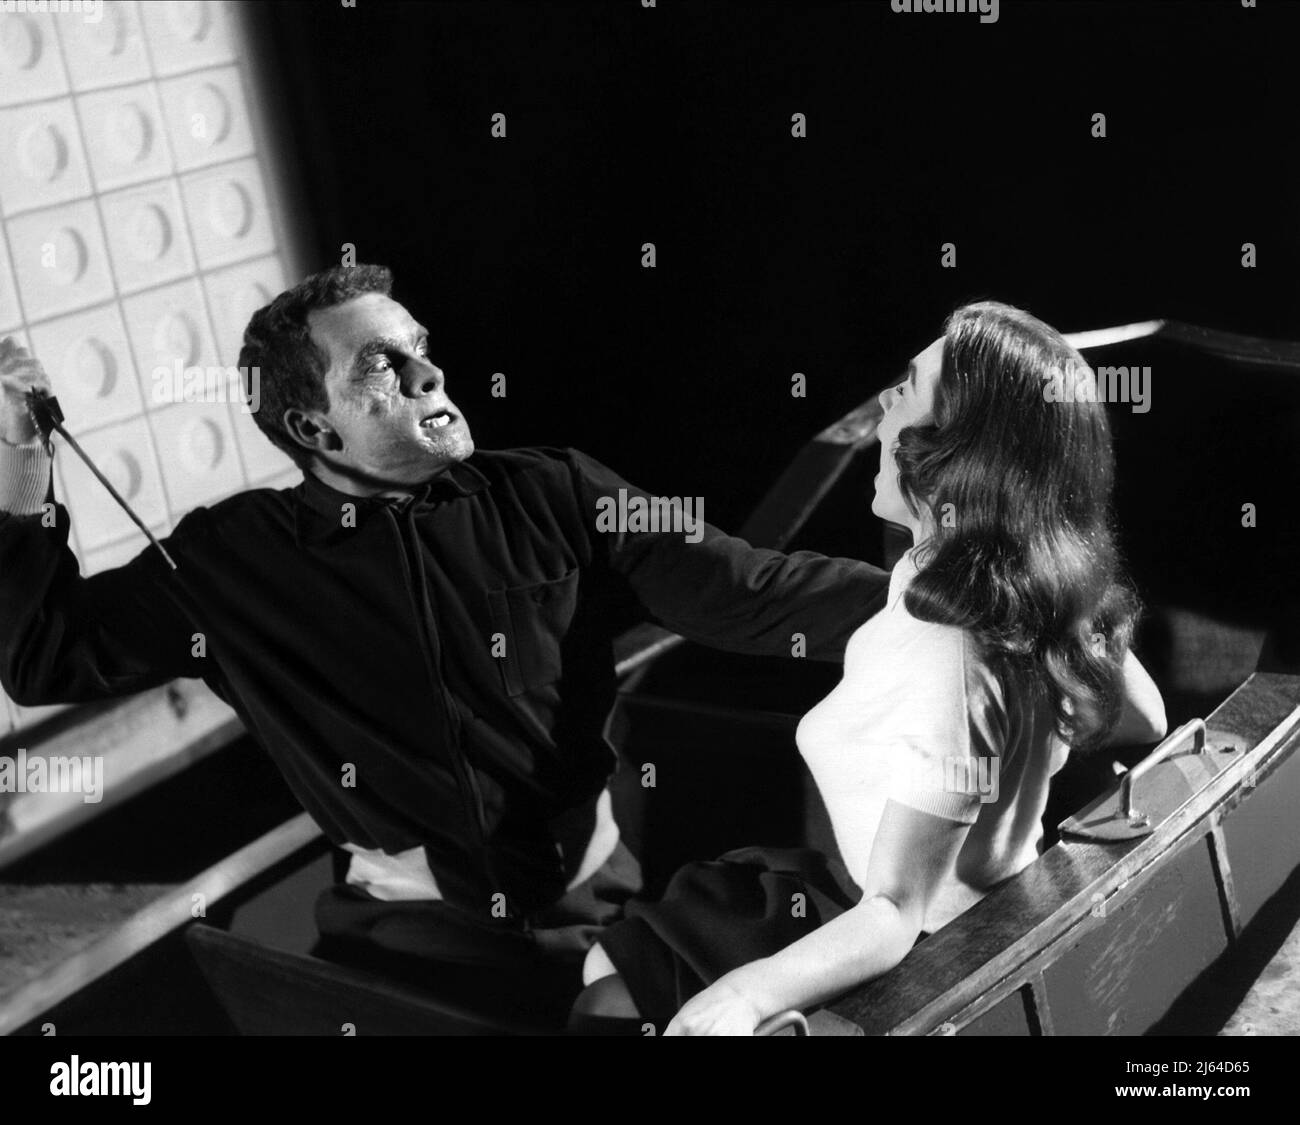 CURNOW, FIELD, HORRORS OF THE BLACK MUSEUM, 1959 Stockfoto